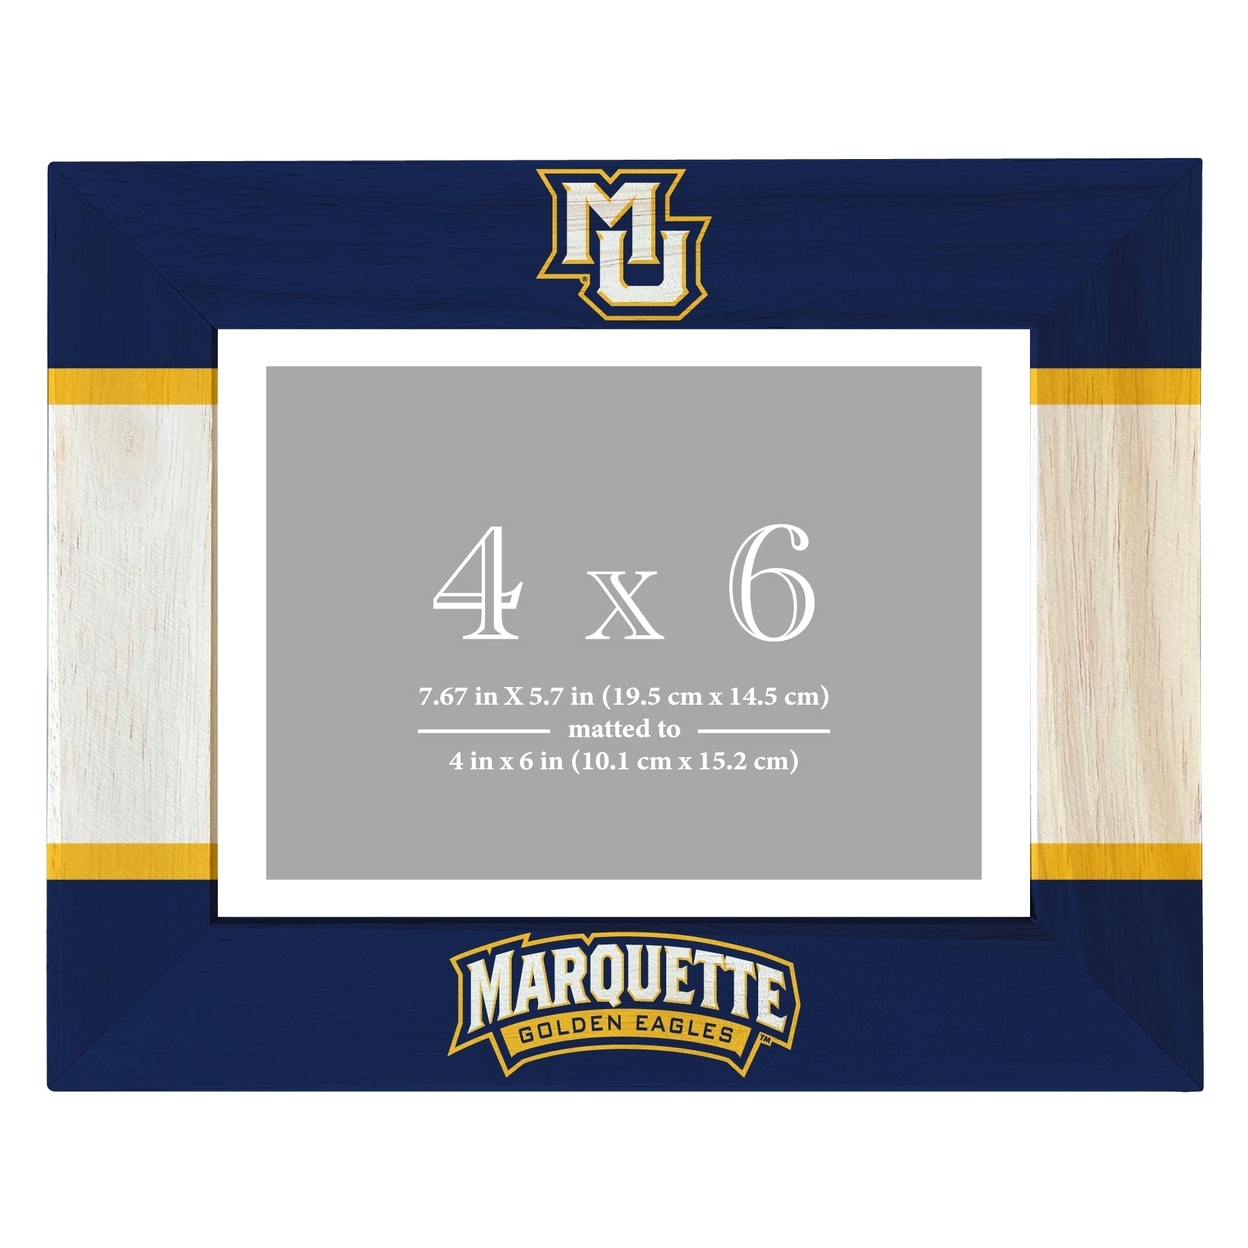 Marquette Golden Eagles Wooden Photo Frame Matted To 4 X 6 Inch - Printed